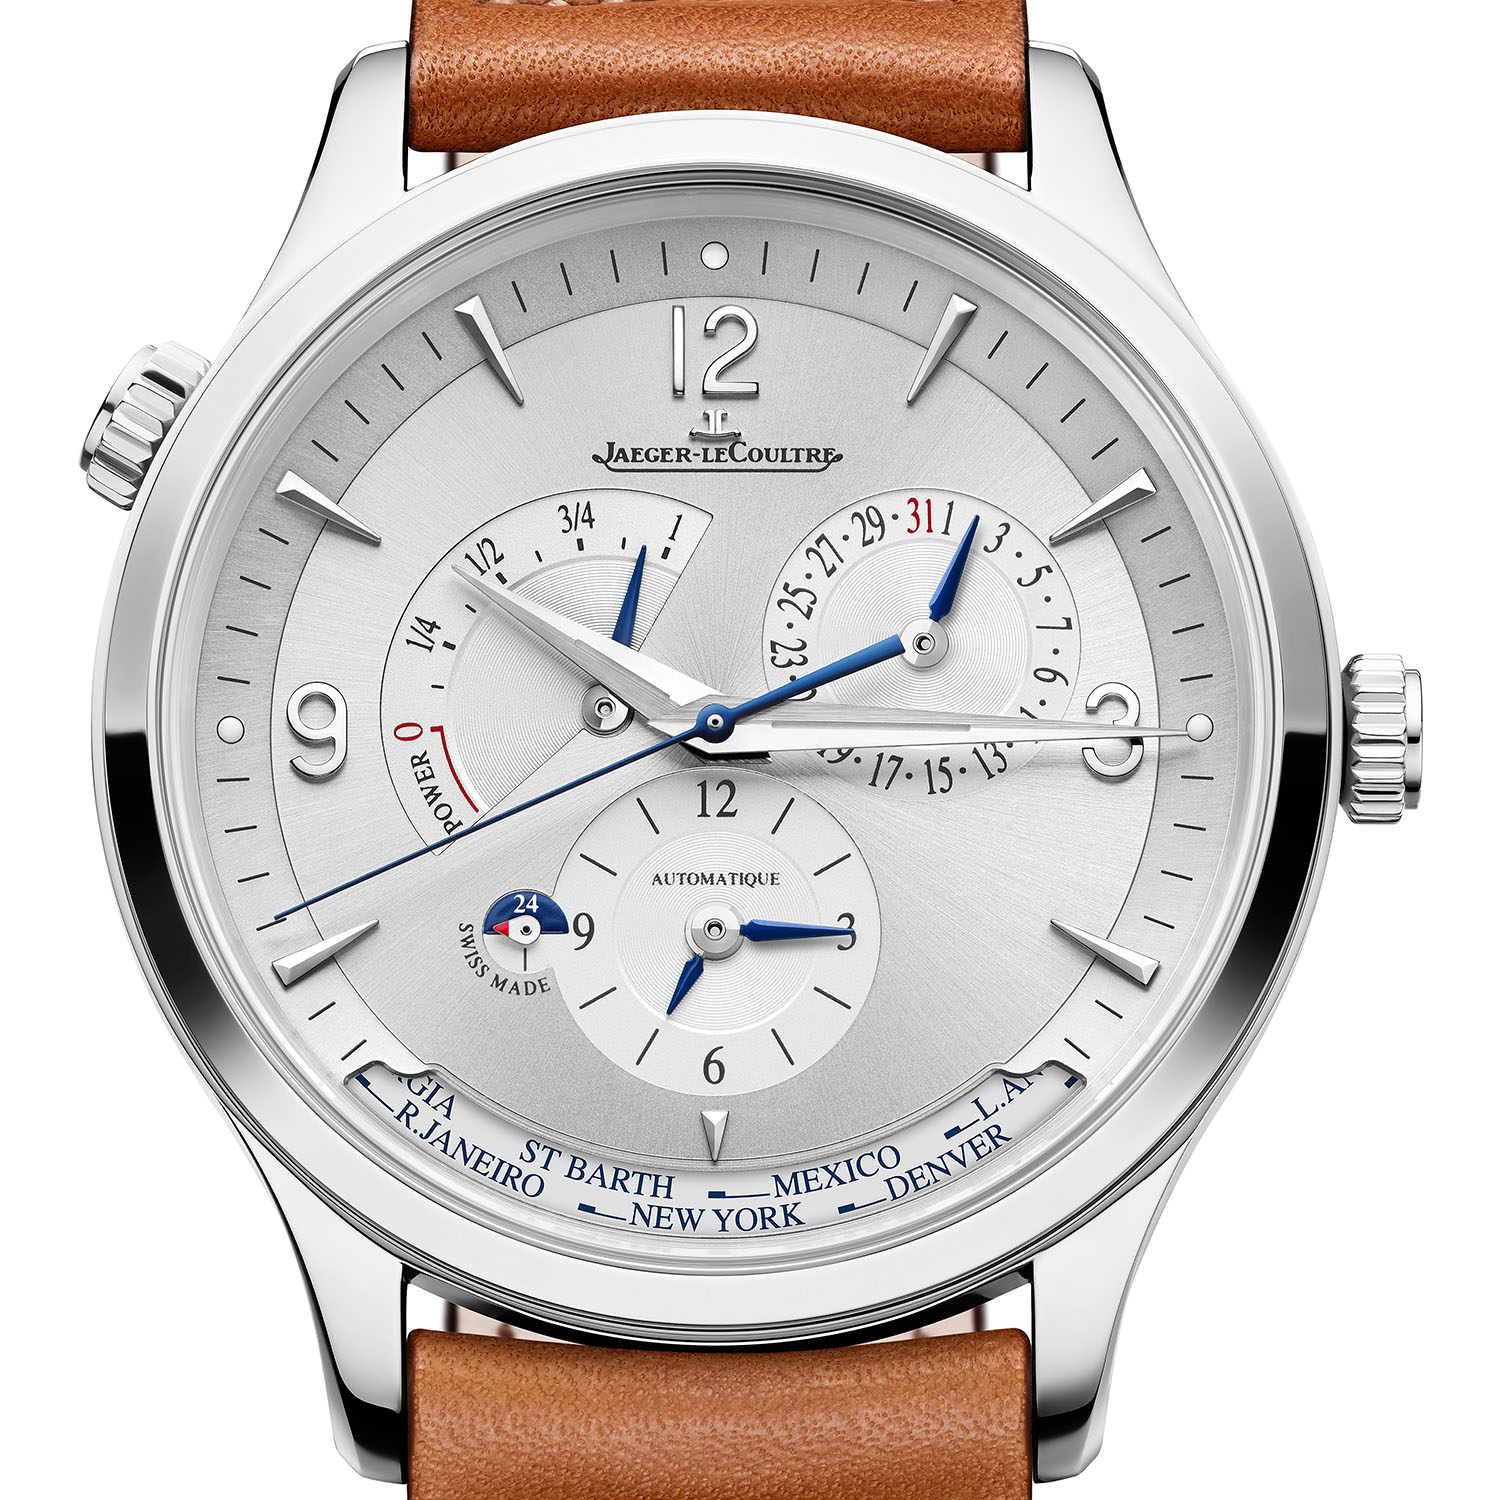 2020 Jaeger-LeCoultre Master Control